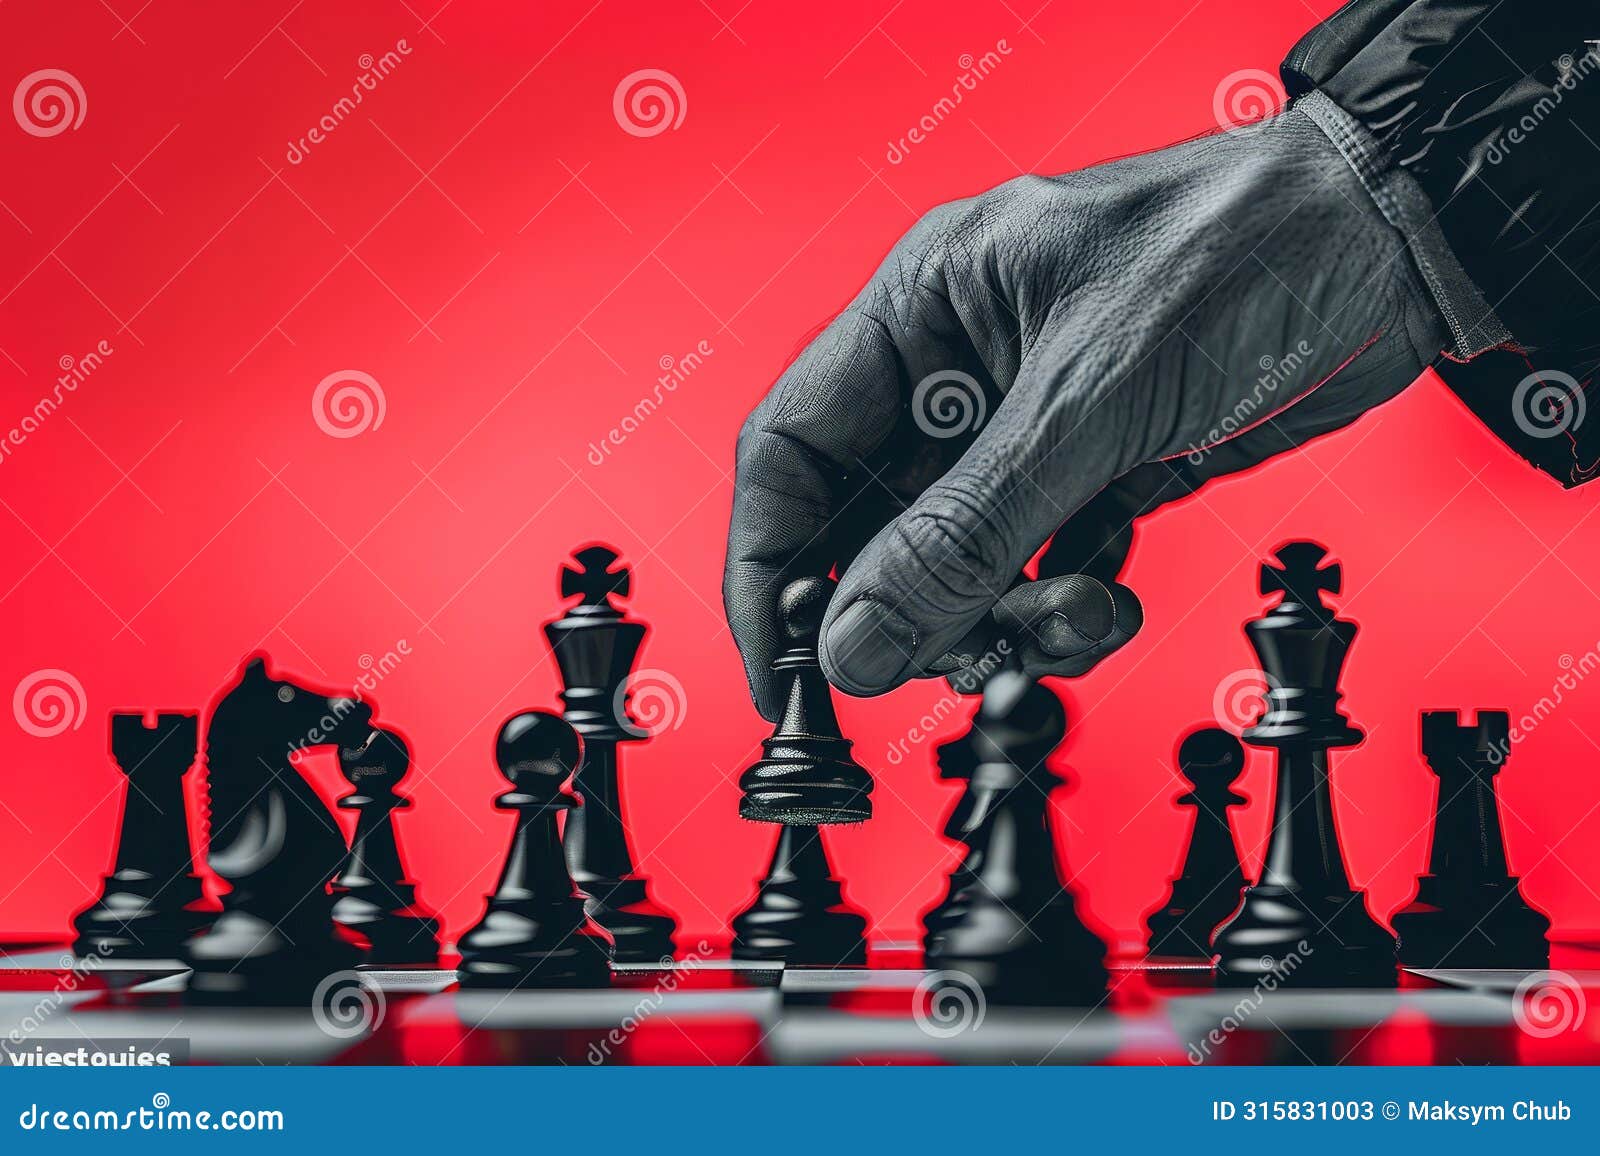 close up of corporate strategist strategically placing chess pieces for business planning